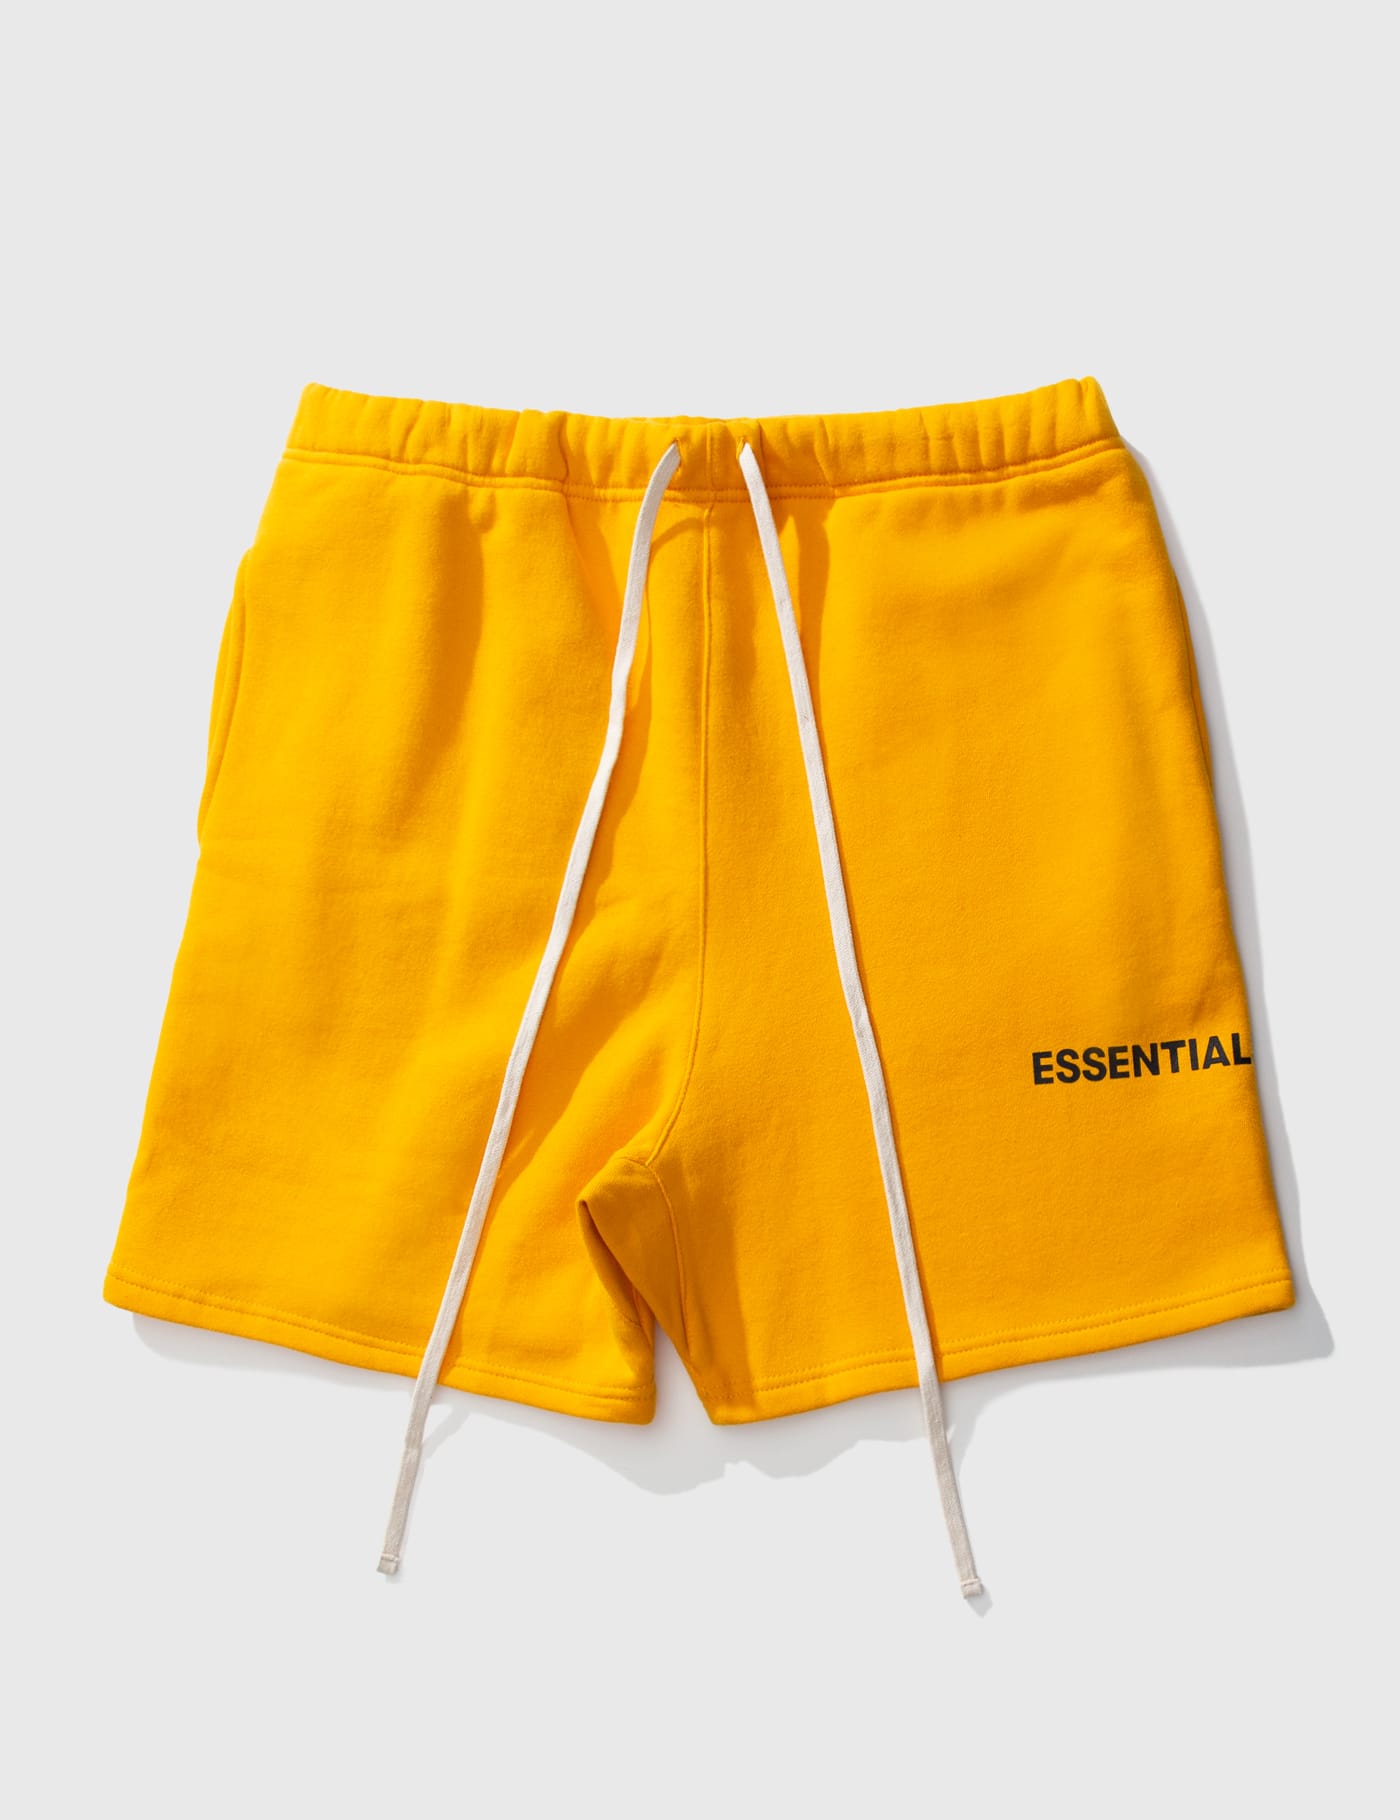 Fear of God Essentials - Fear Of God Essentials Sweat Shorts | HBX -  Globally Curated Fashion and Lifestyle by Hypebeast